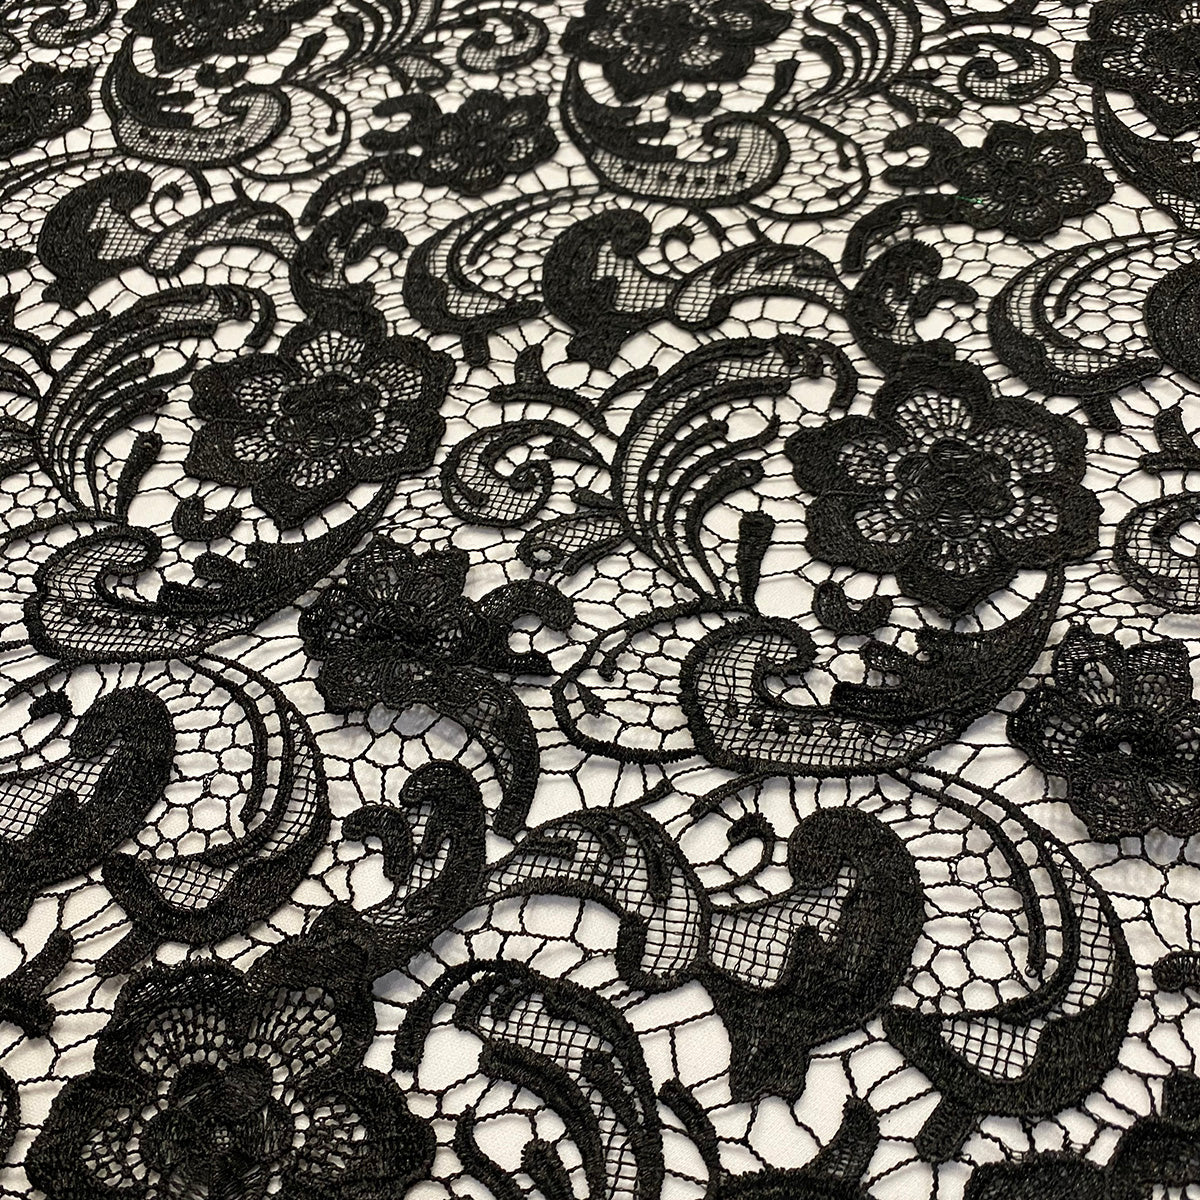 English Lace Wholesale Fabric in Black